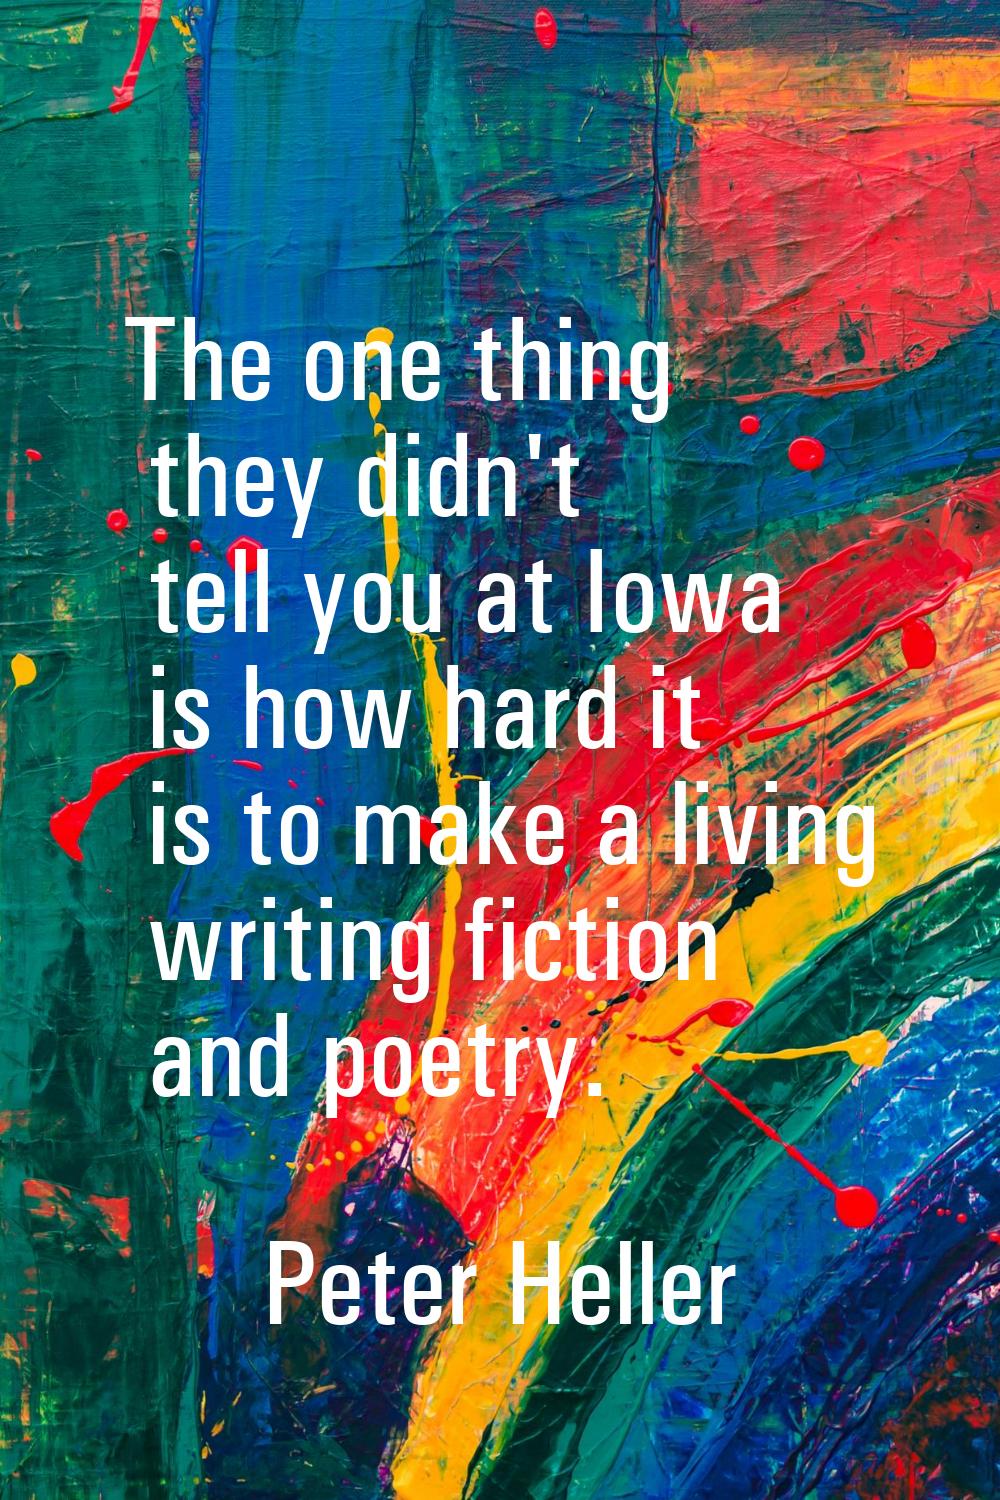 The one thing they didn't tell you at Iowa is how hard it is to make a living writing fiction and p